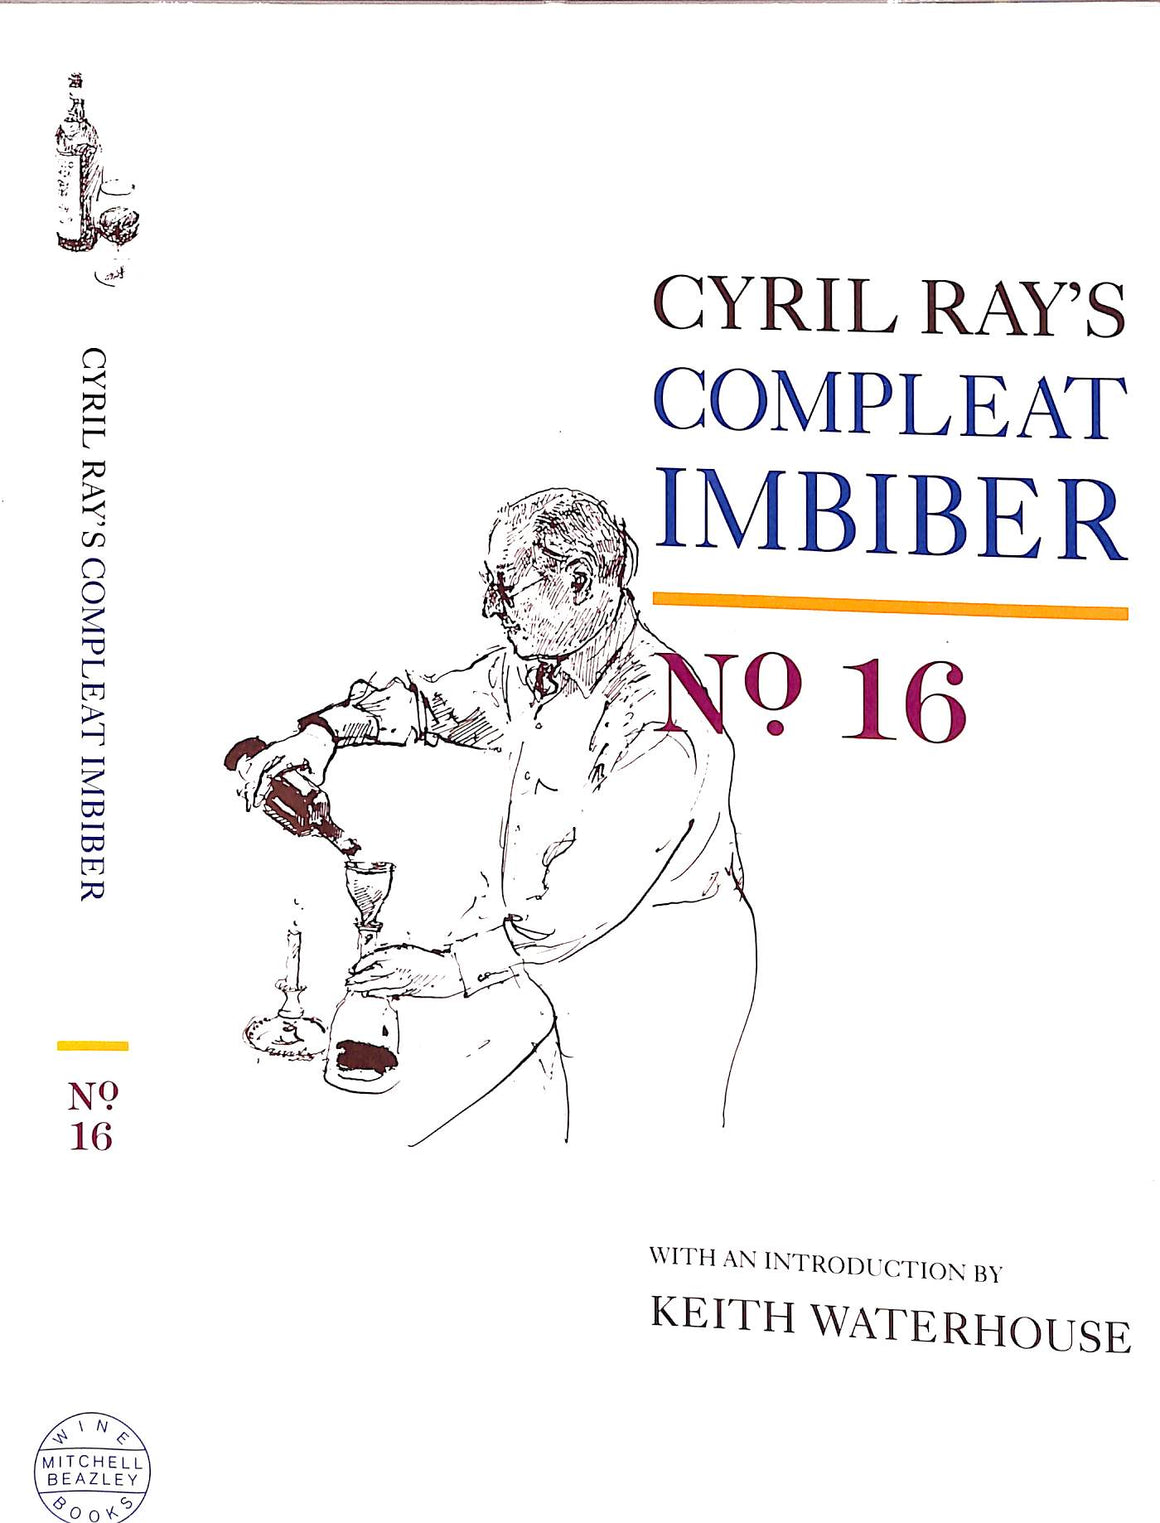 "Cyril Ray's Compleat Imbiber: No. 16" 1992 RAY, Cyril [edited by]